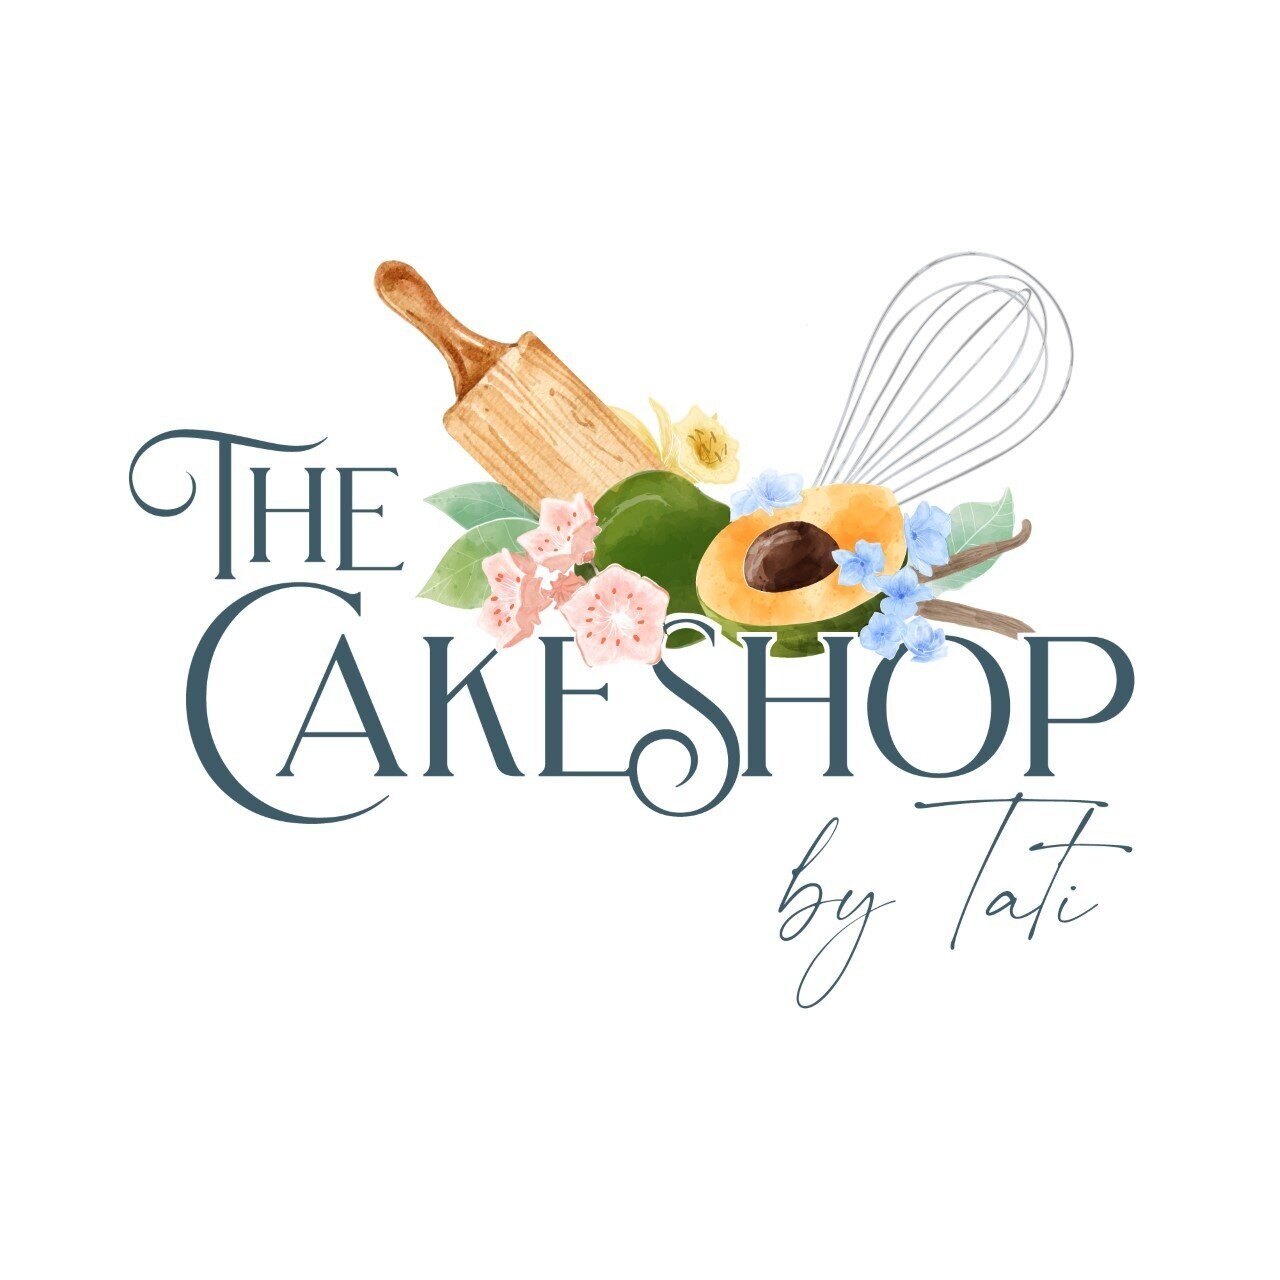 The Cakeshop by Tati